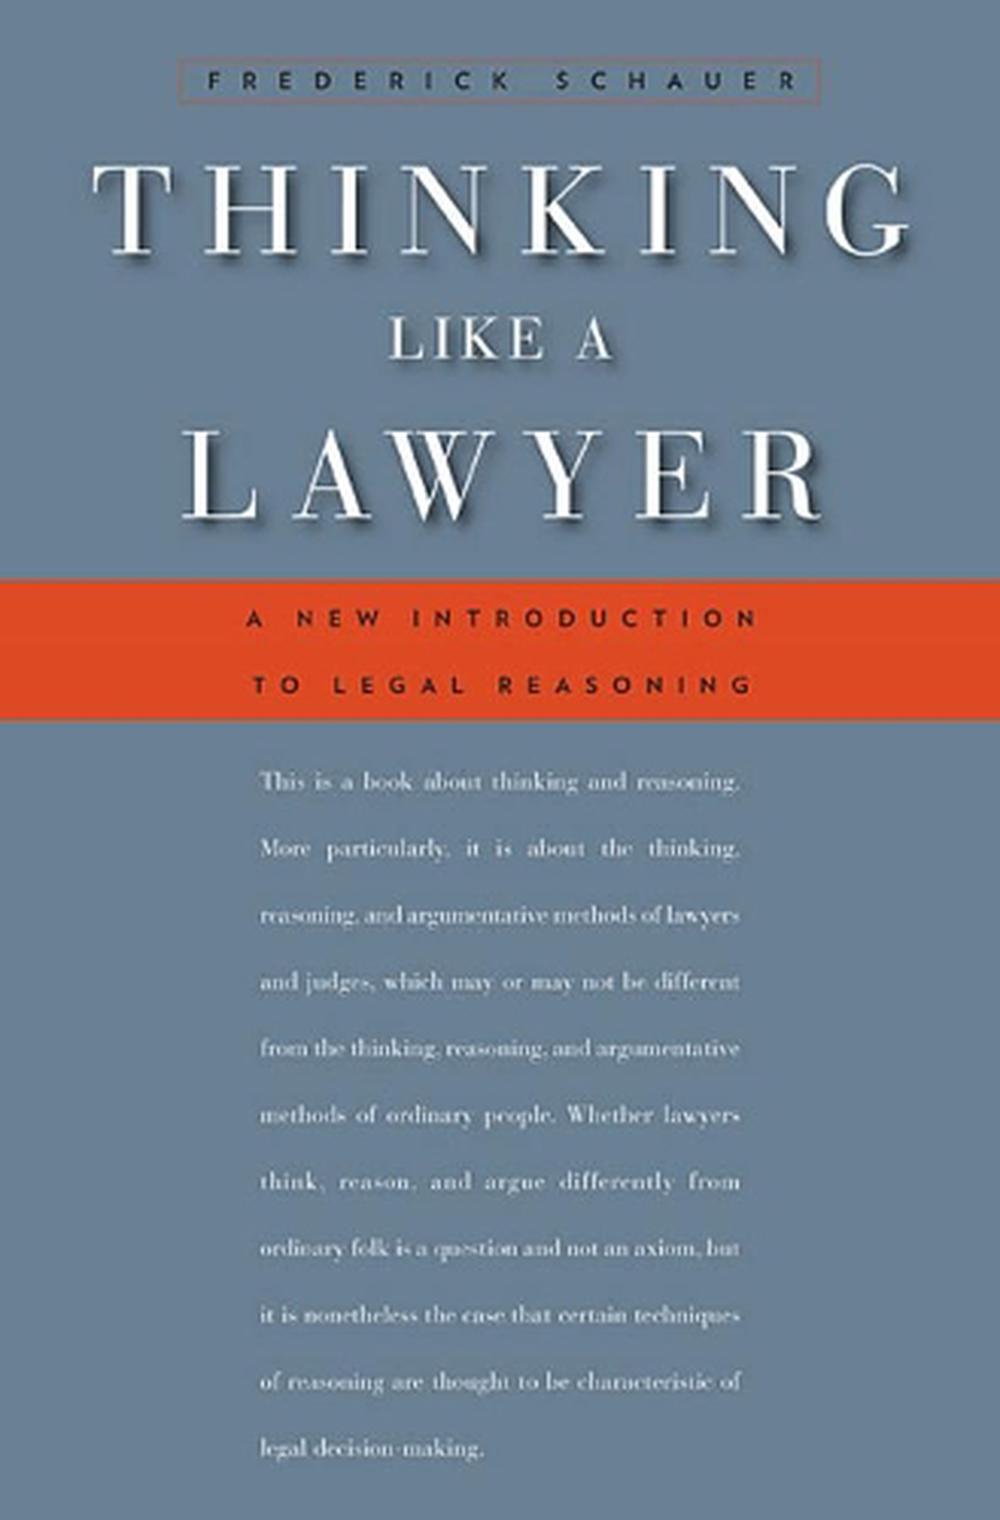 thinking like a lawyer book review